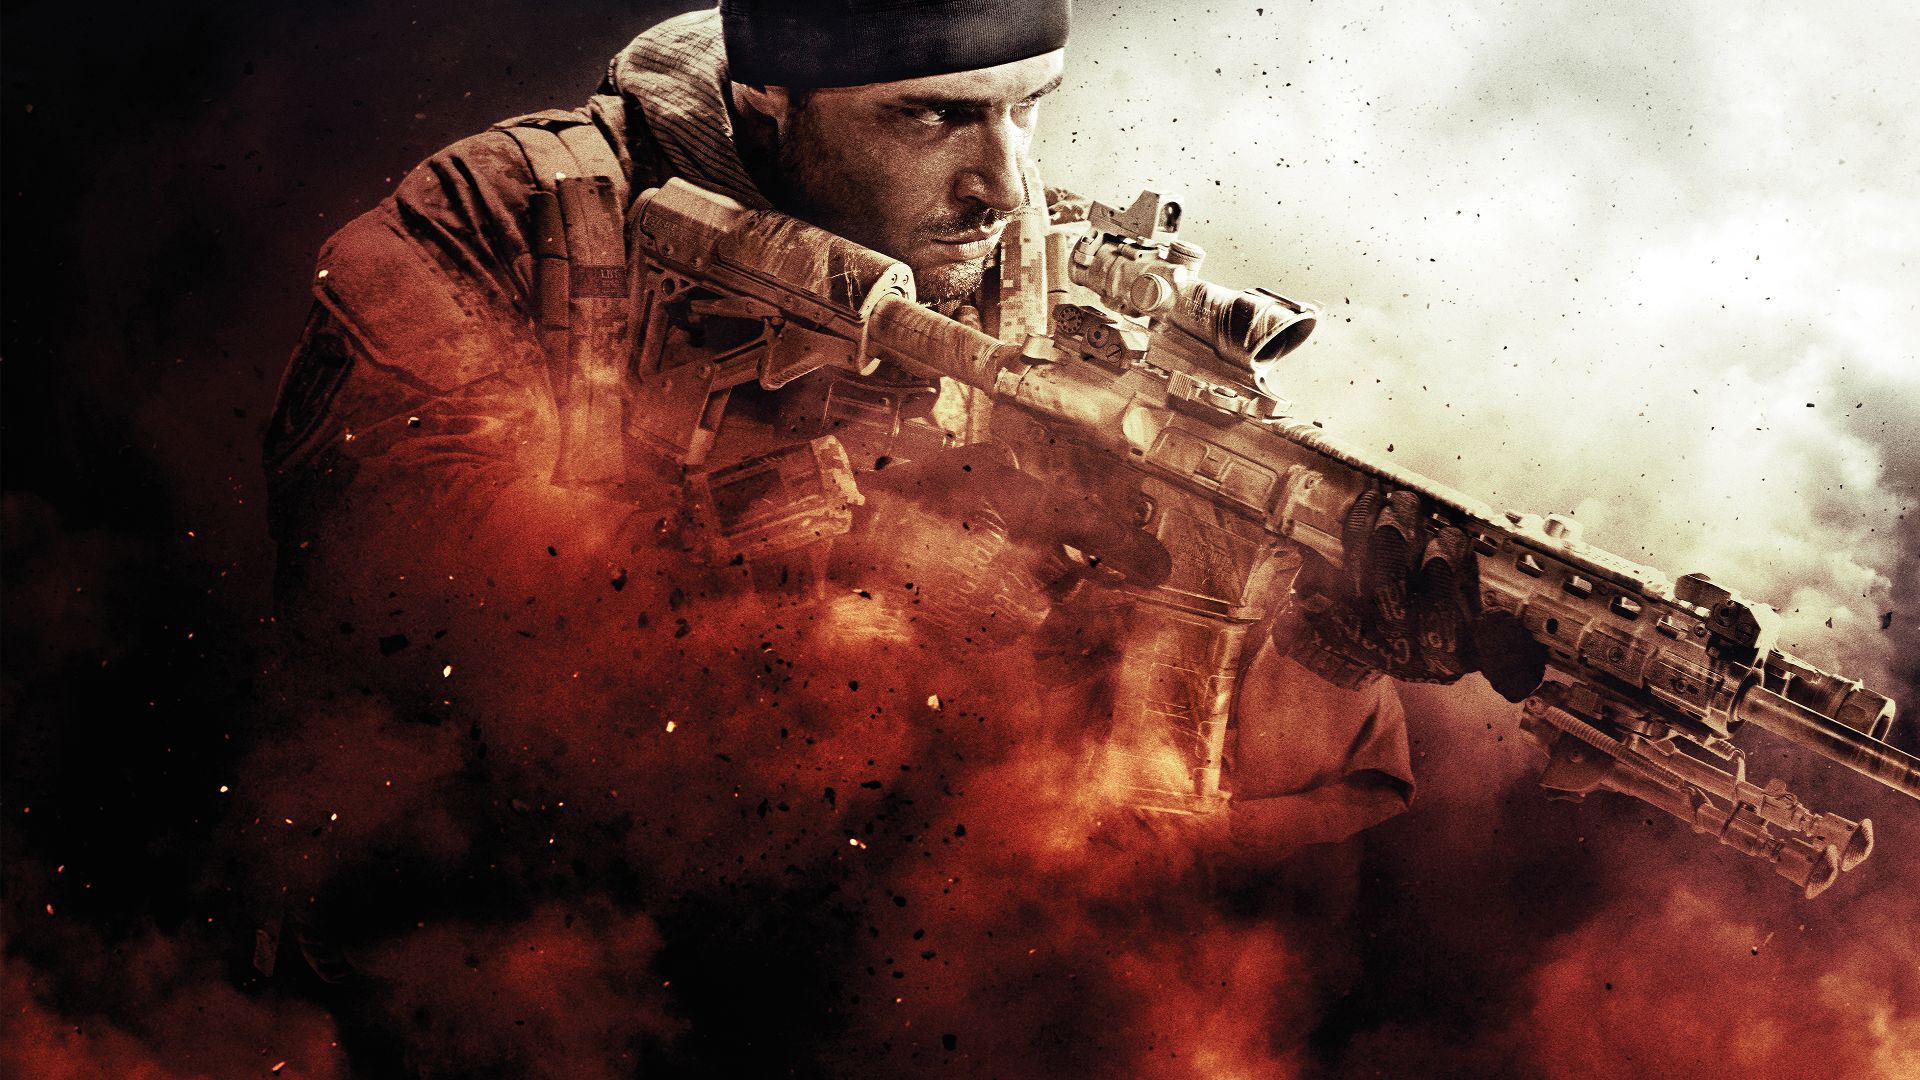 Medal Of Honor: Warfighter wallpaper, Video Game, HQ Medal Of Honor: Warfighter pictureK Wallpaper 2019